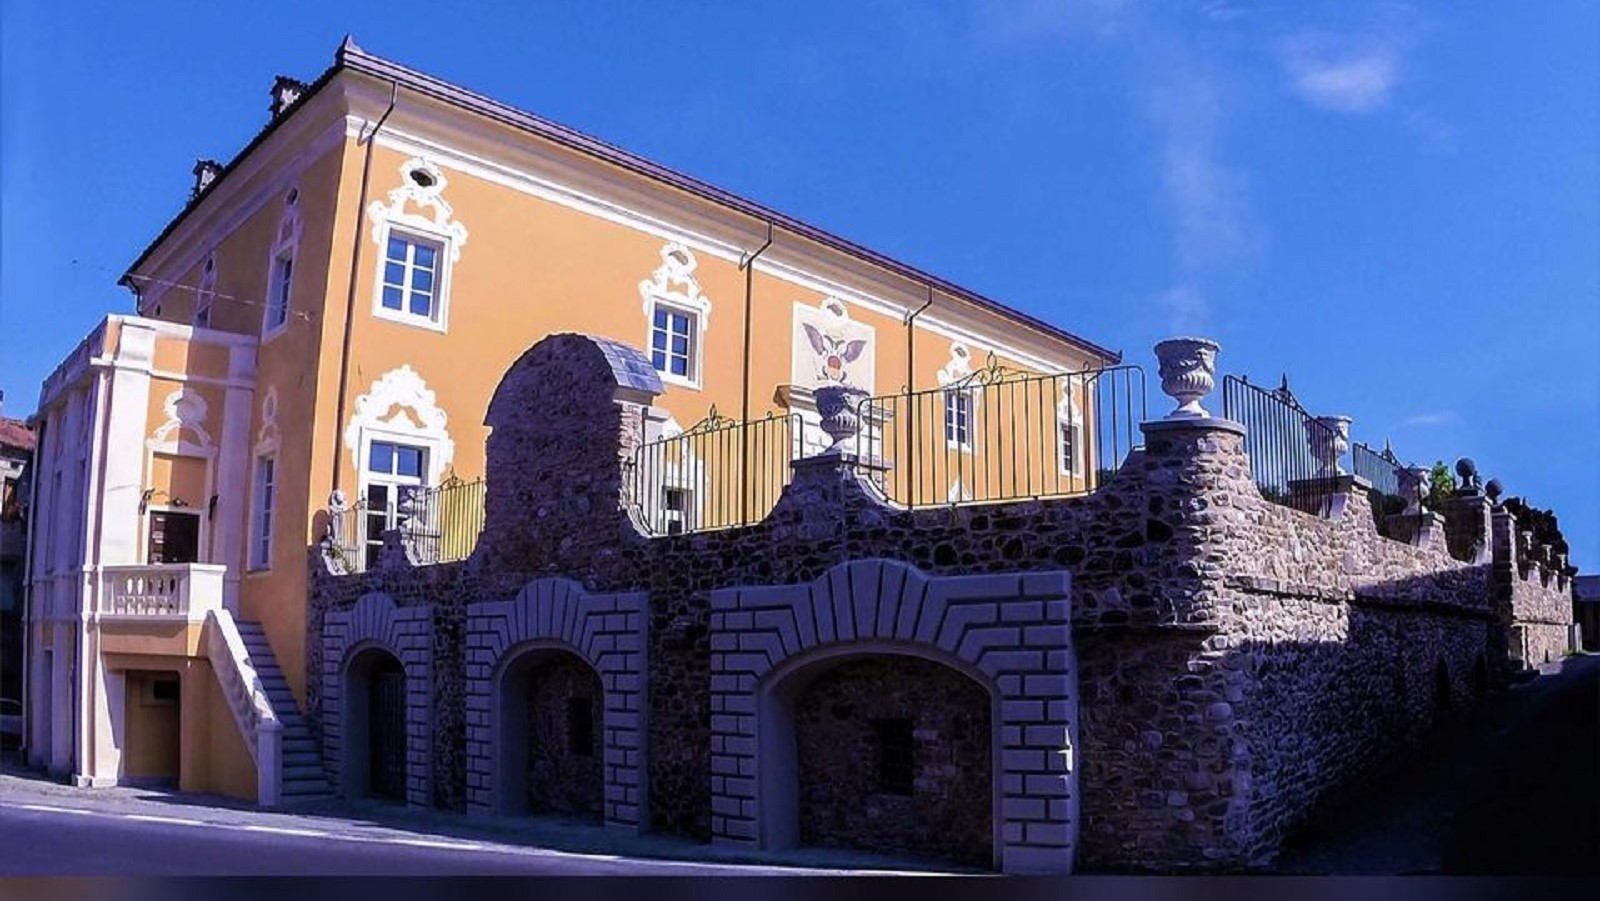 View of the Castle of Pallerone